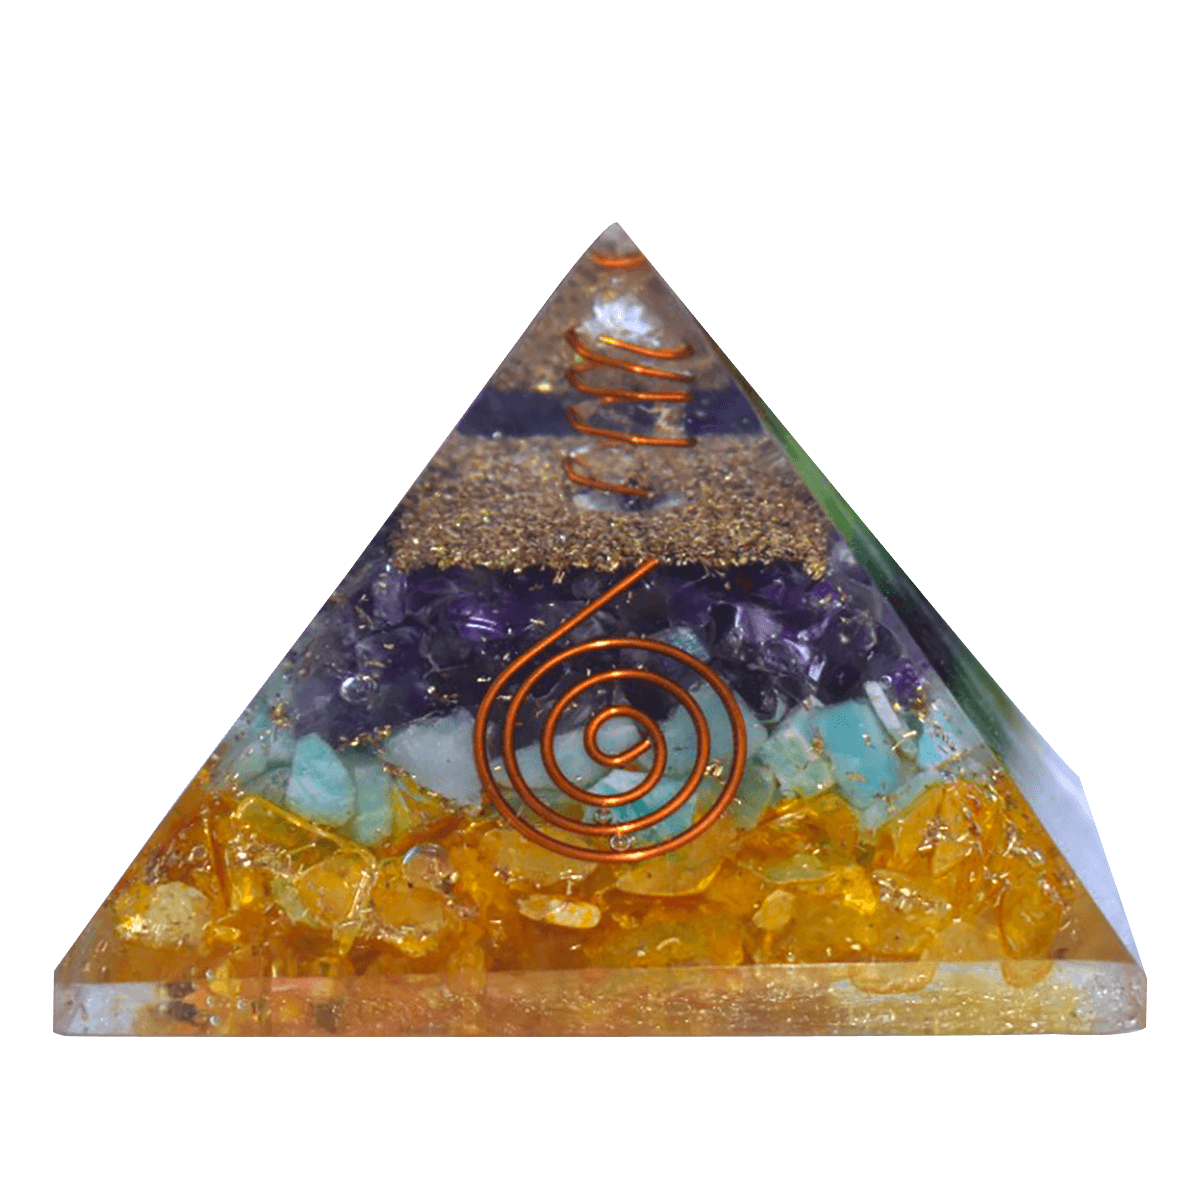 Adaptability & Growth in Career Pyramid, Made of Natural Crystal for Growth, Stability in Career. Feng Shui remedy